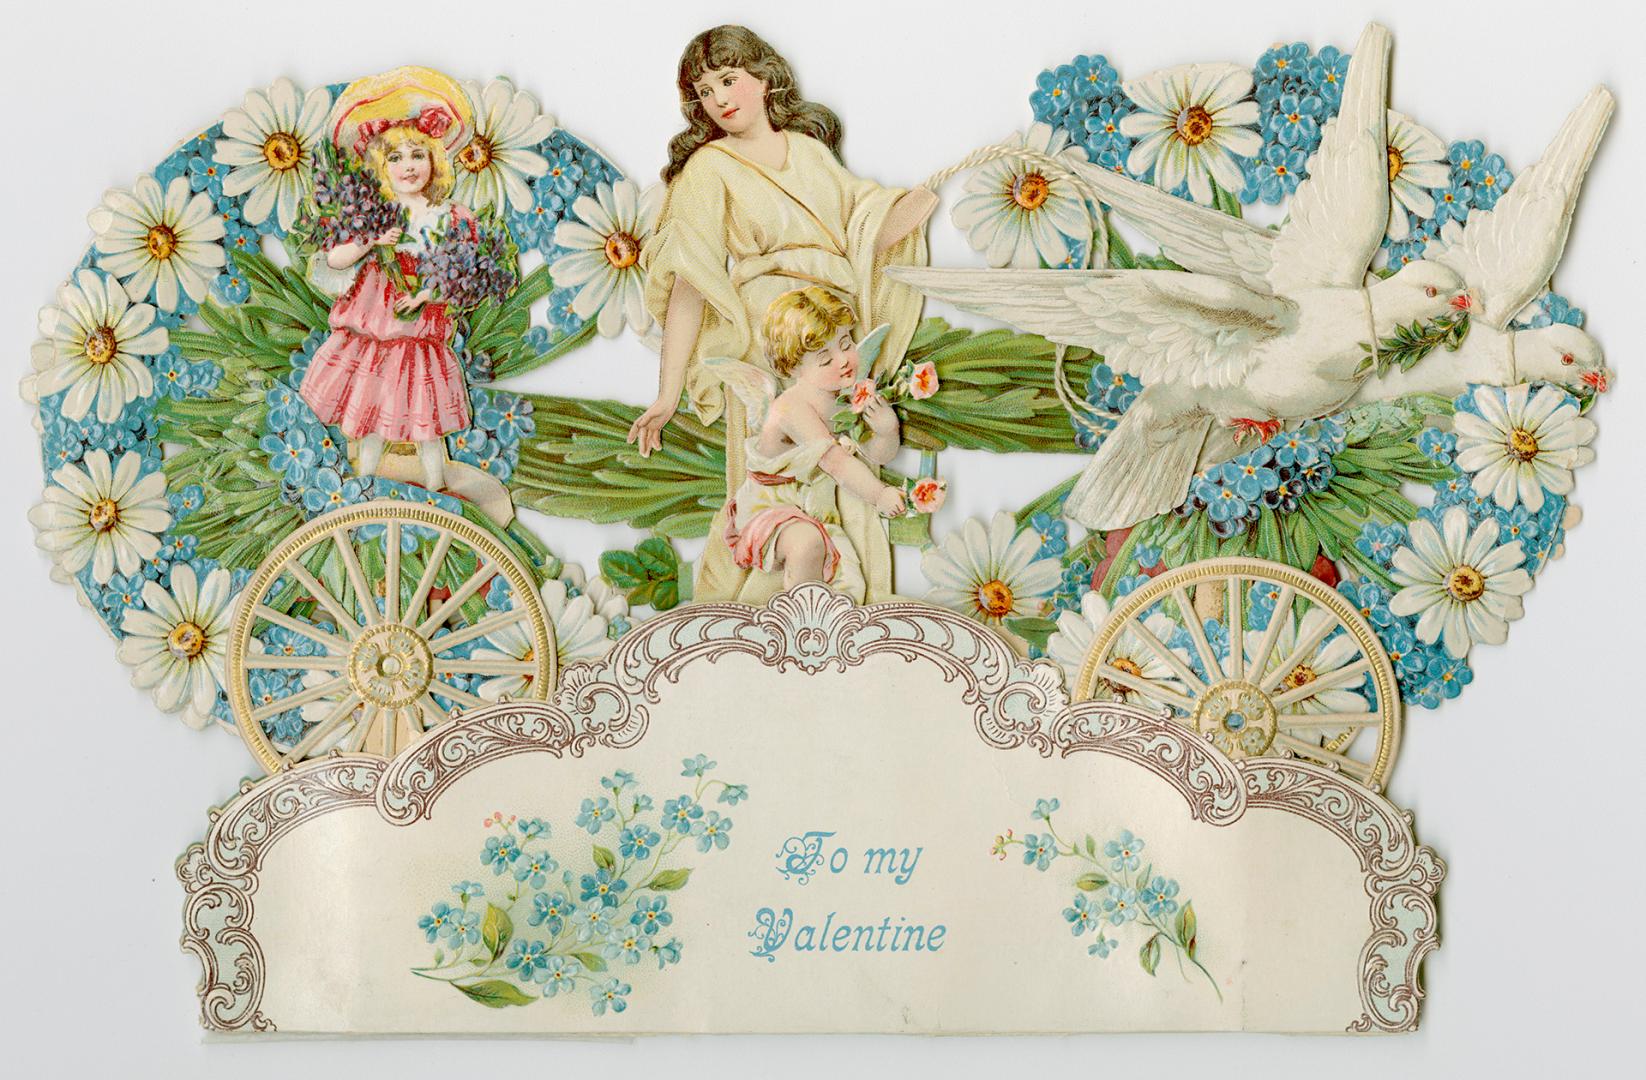 A lady in cream coloured robes drives a carriage made of blue and white flowers. The carriage i ...